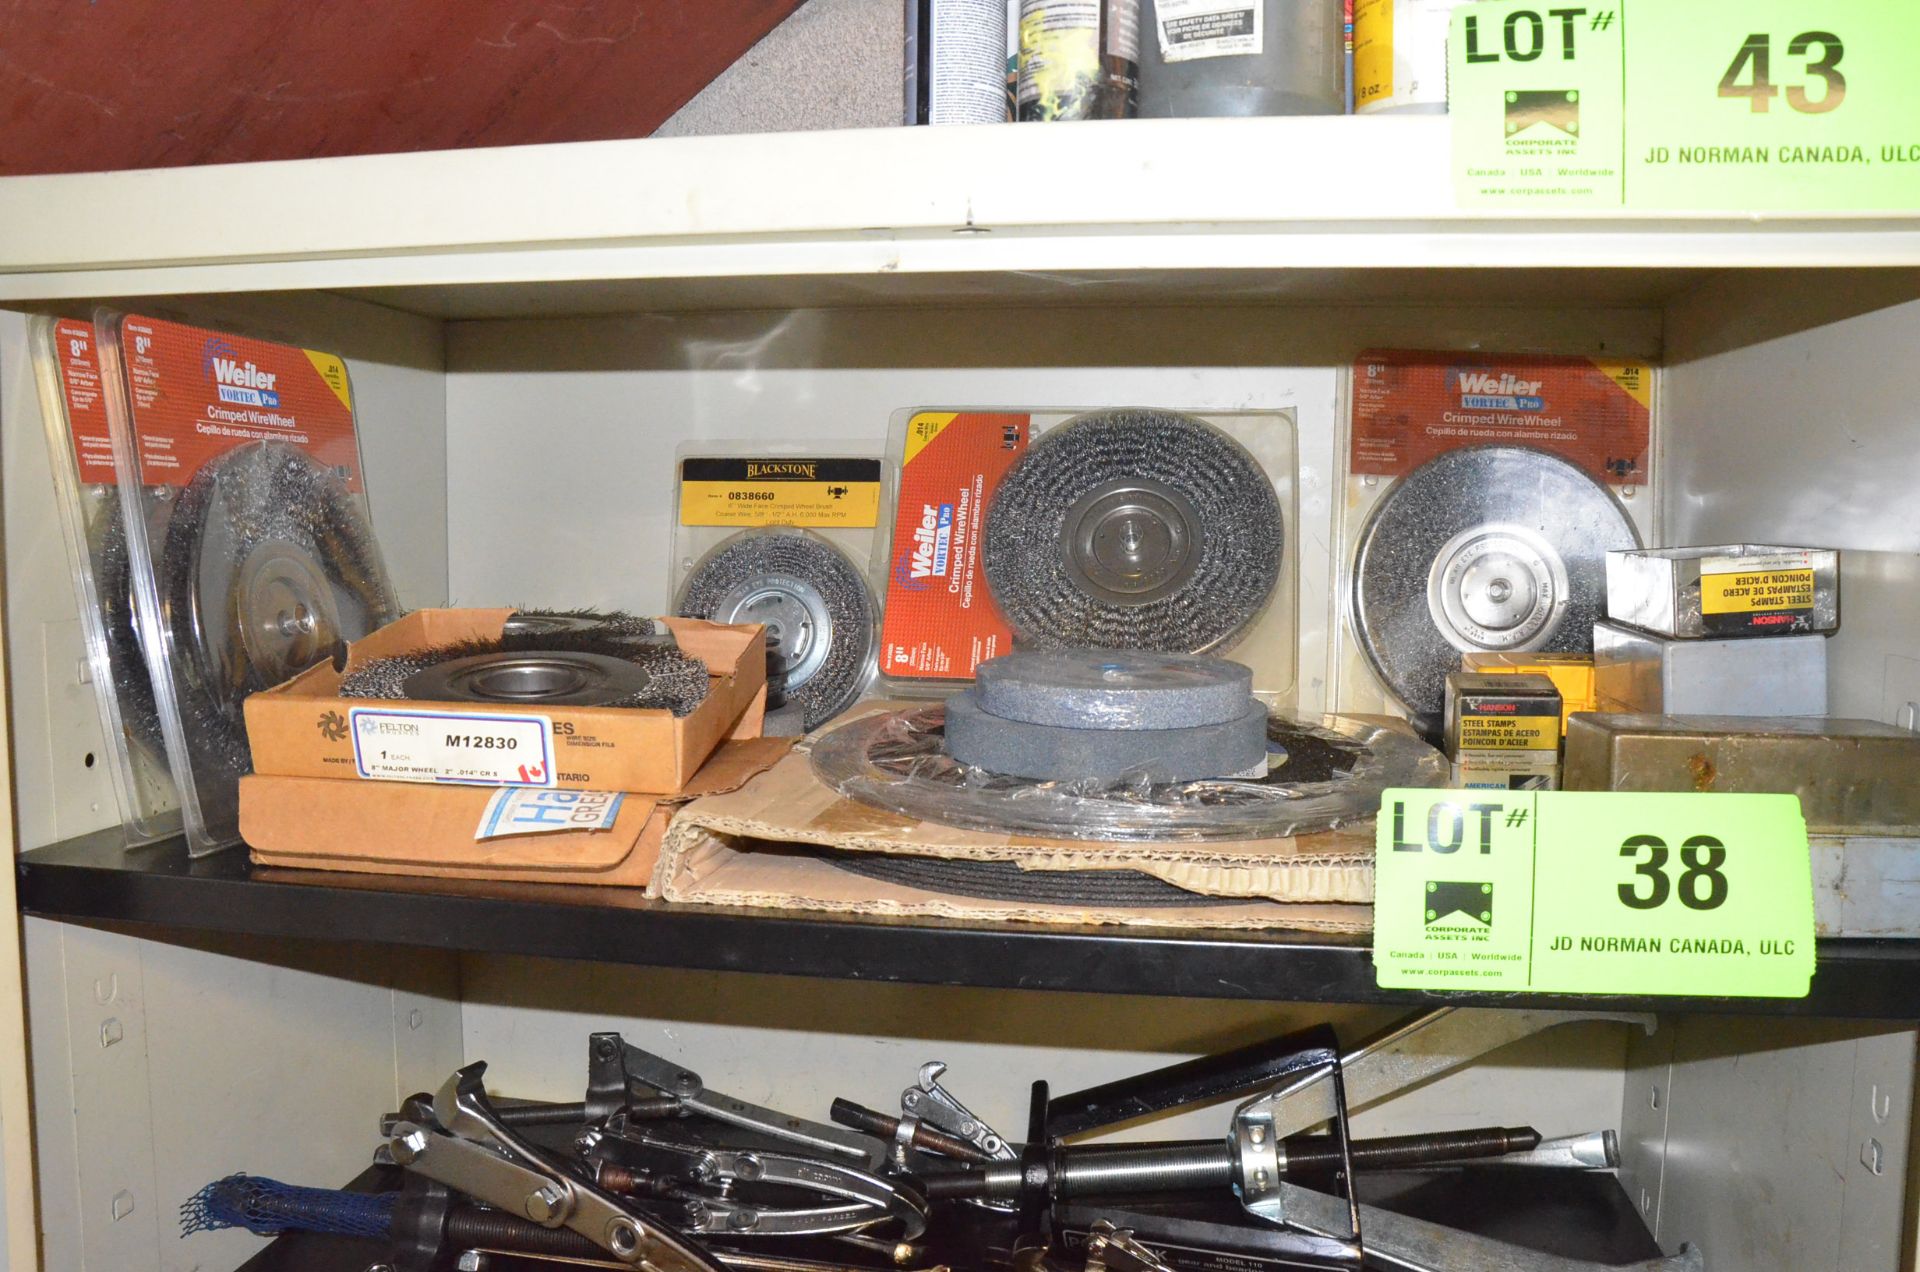 LOT/ CONTENTS OF SHELF - ABRASIVE AND WIRE WHEELS